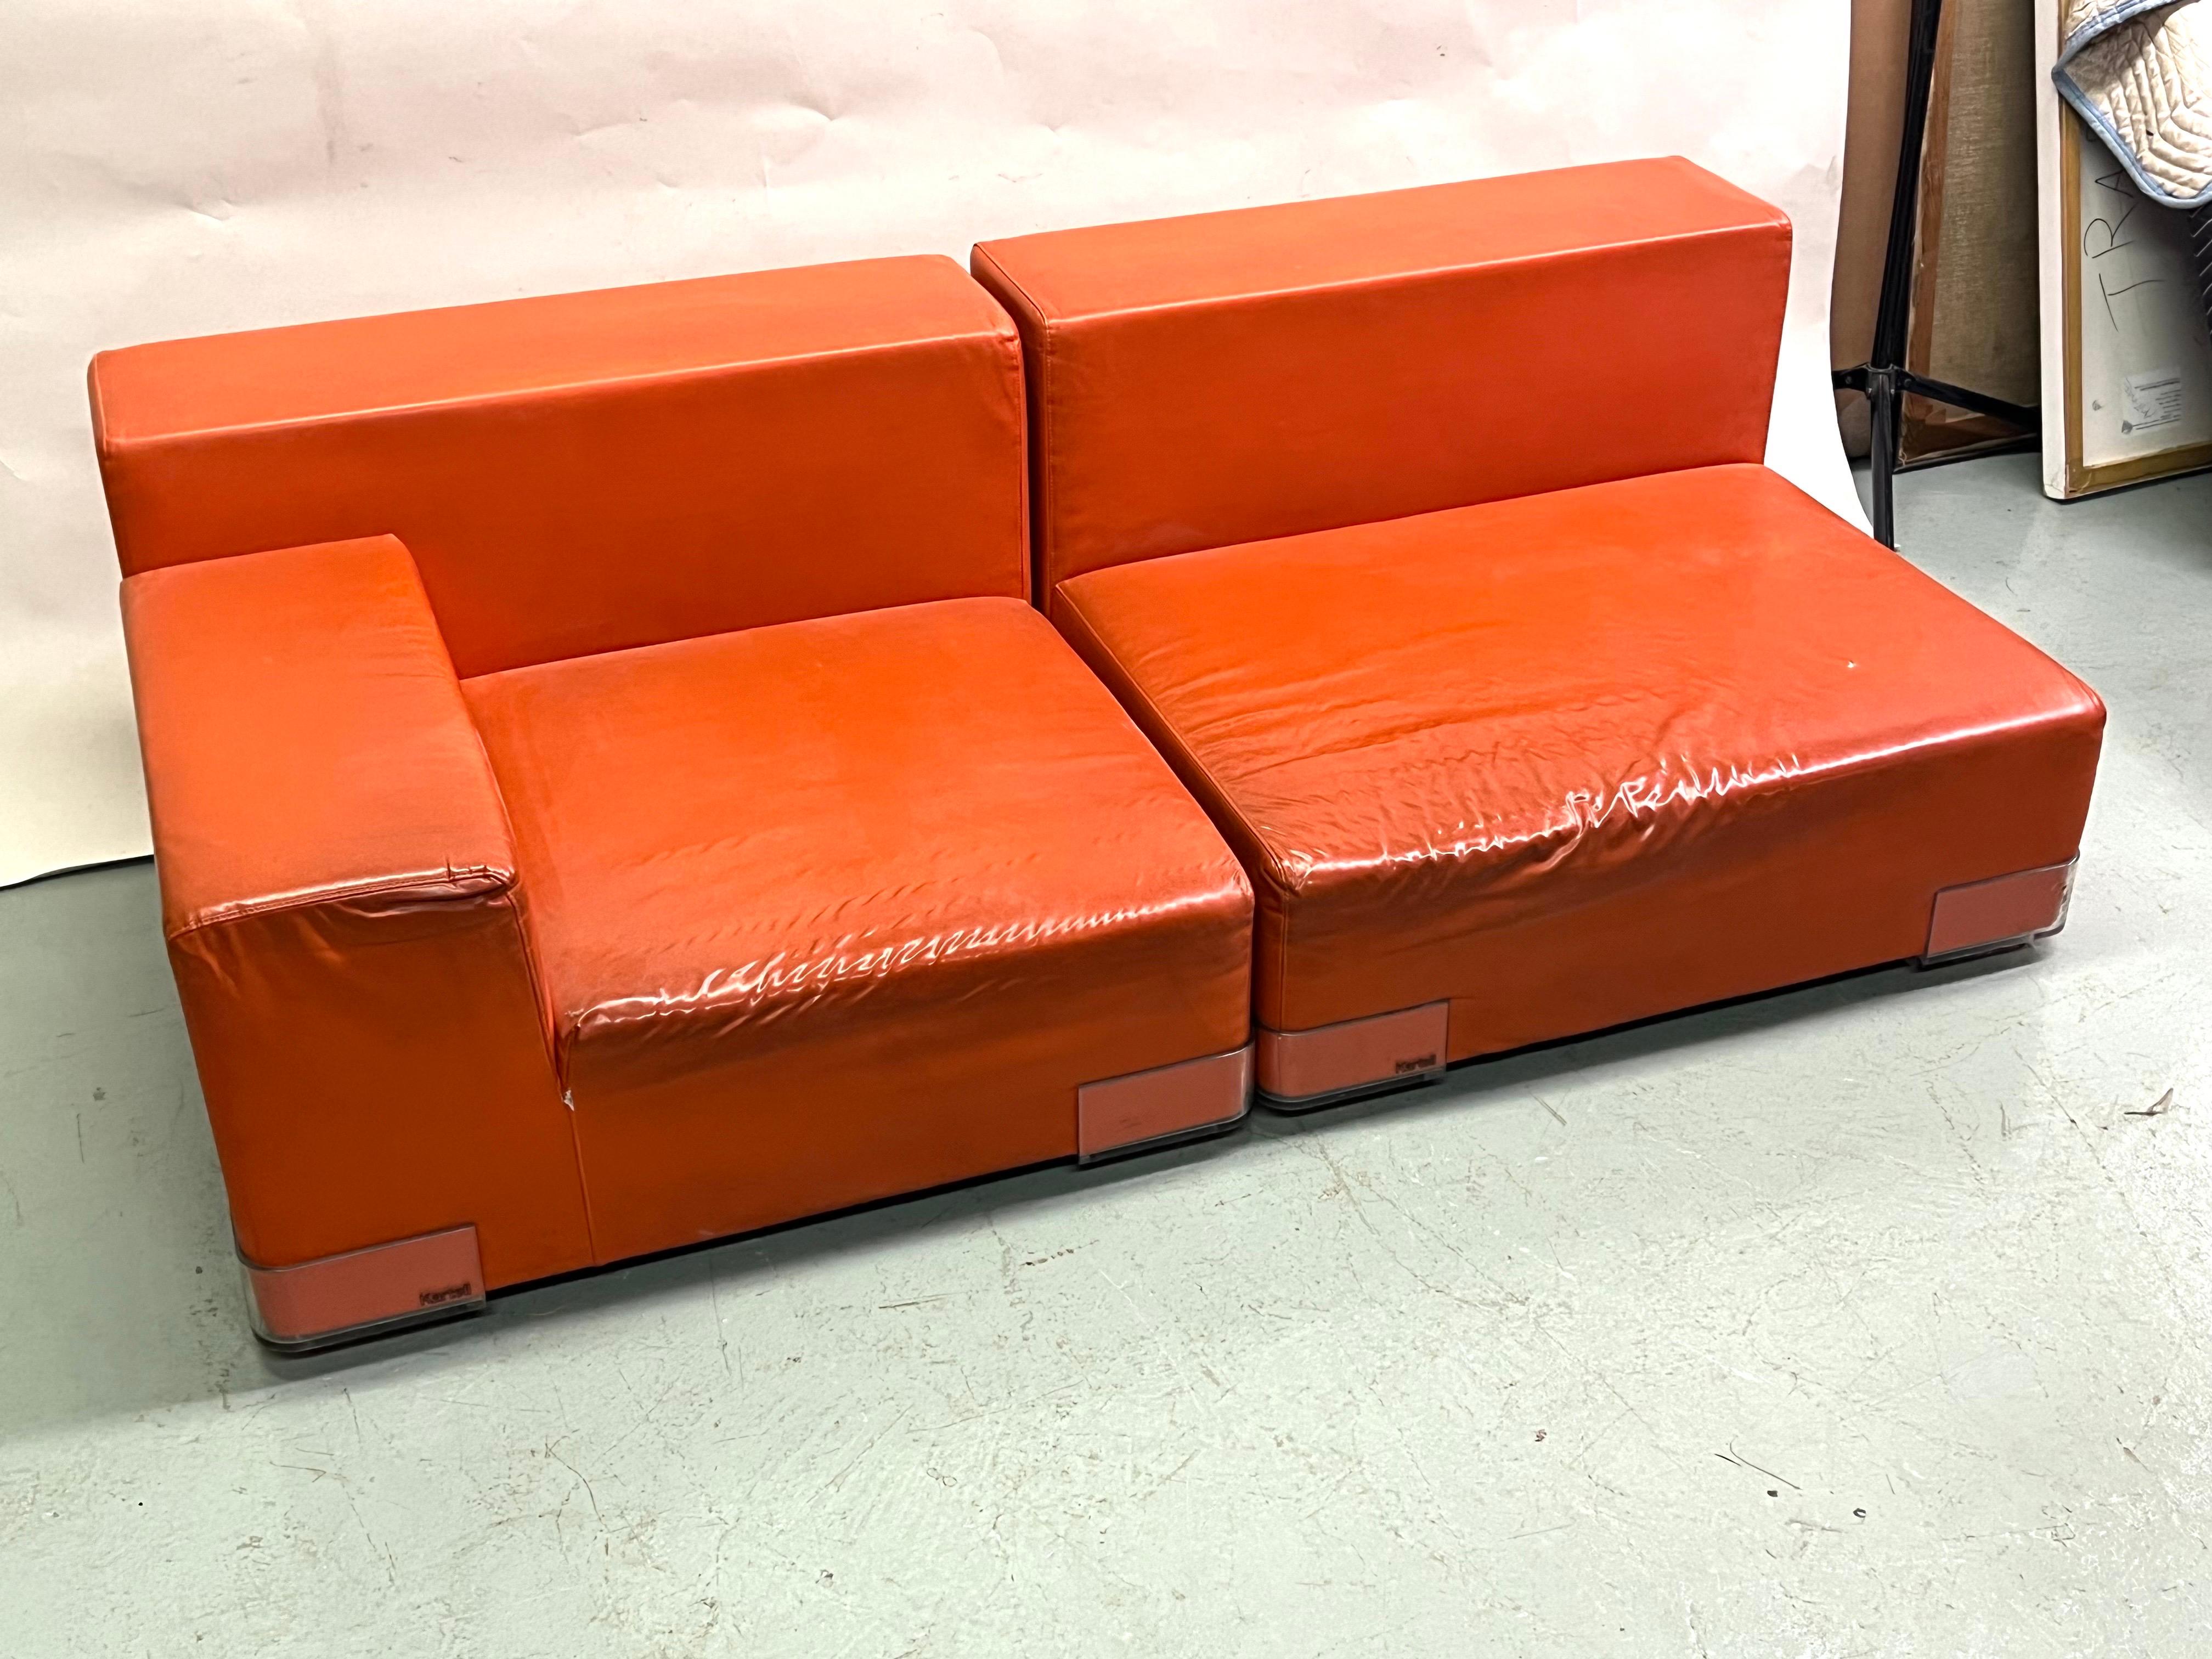 An Iconic Italian Mid-Century Sofa / Settee / Pair of Lounge Chairs by Piero Lissoni in a sleek, contemporary, low, square form circa 1970-1975. The sofa is modular, multi-functional and will form a pair of chairs. It is decorated in a bright orange